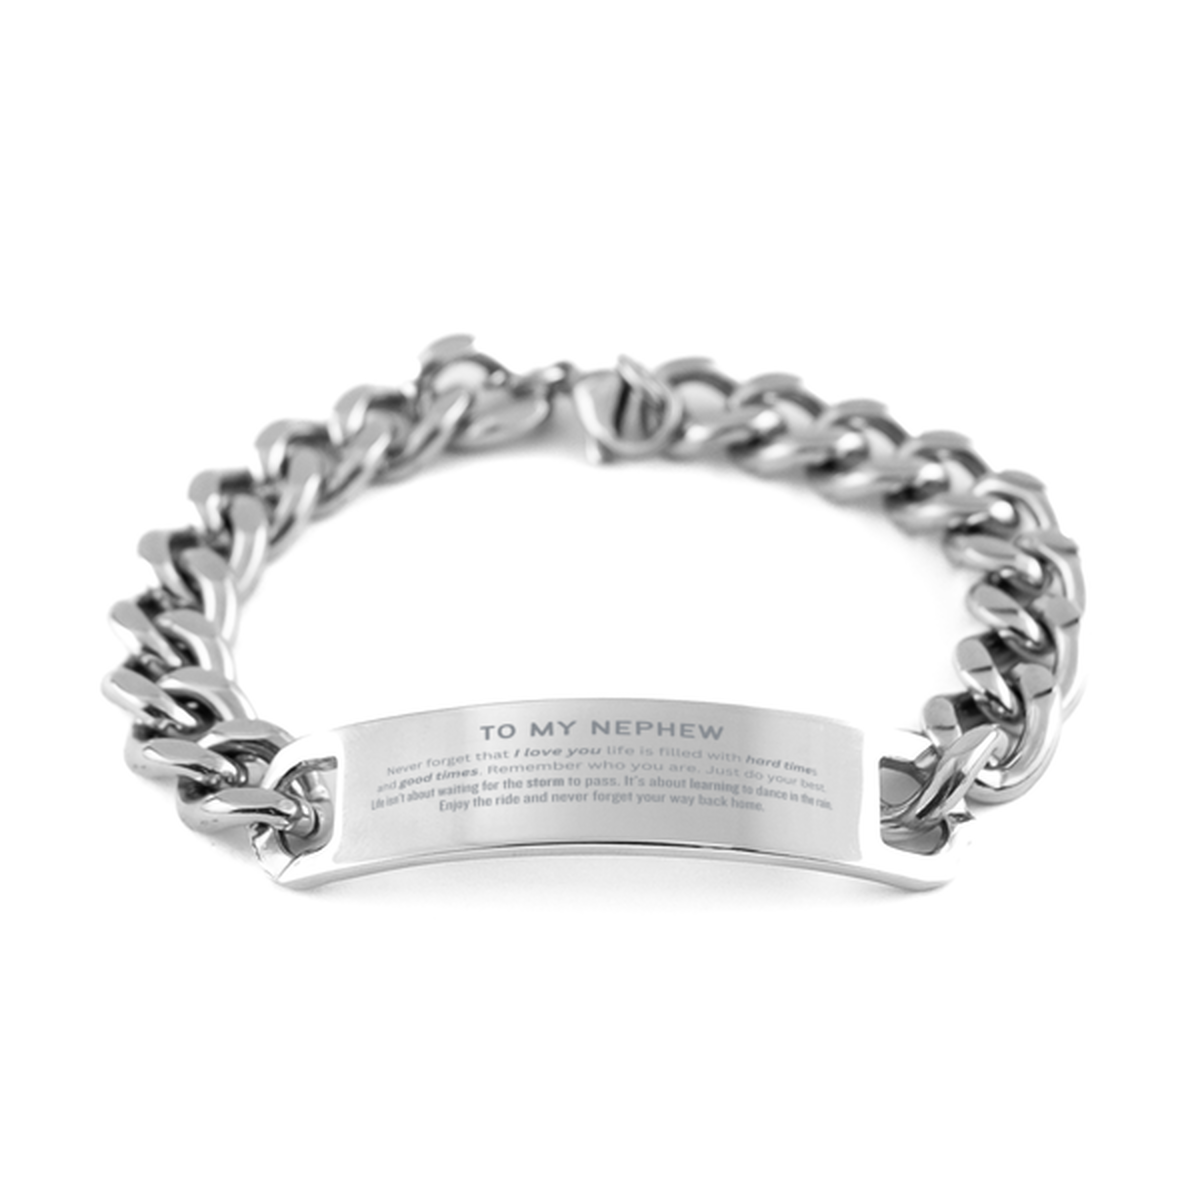 Christmas Nephew Cuban Chain Stainless Steel Bracelet Gifts, To My Nephew Birthday Thank You Gifts For Nephew, Graduation Unique Gifts For Nephew To My Nephew Never forget that I love you life is filled with hard times and good times. Remember who you are